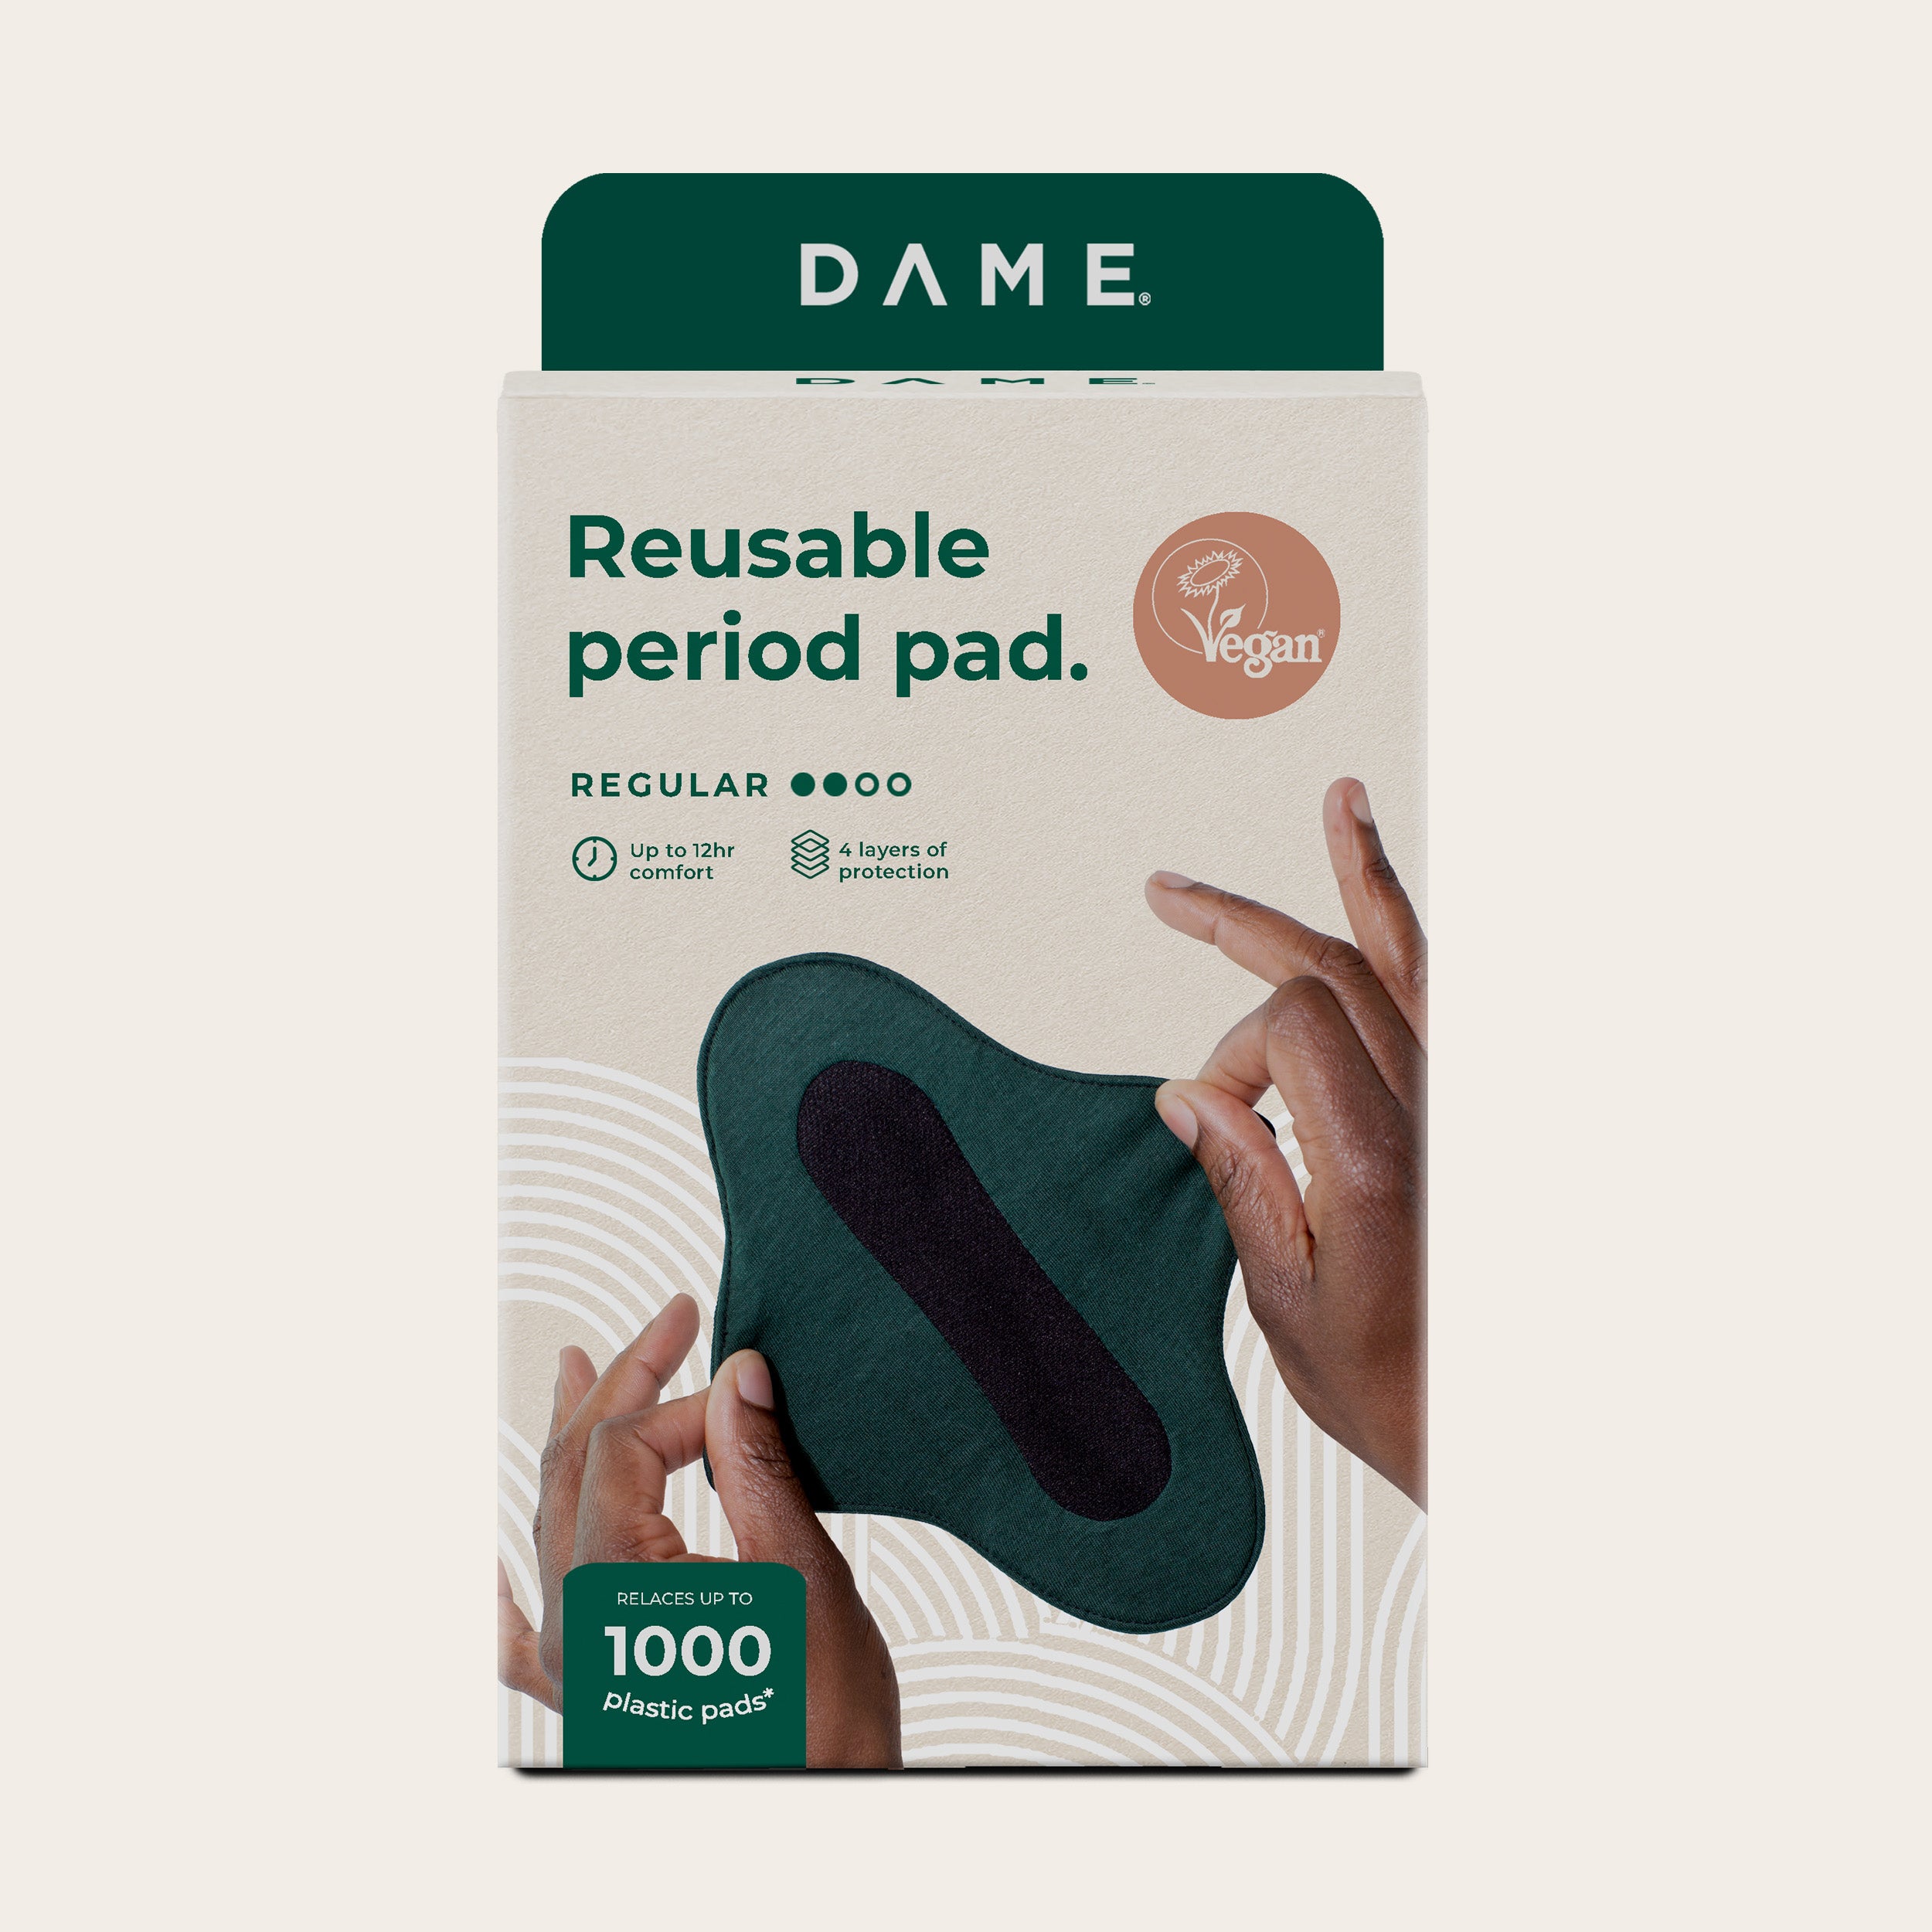 Reusable Period Products (Part 2: Reusable pads and period